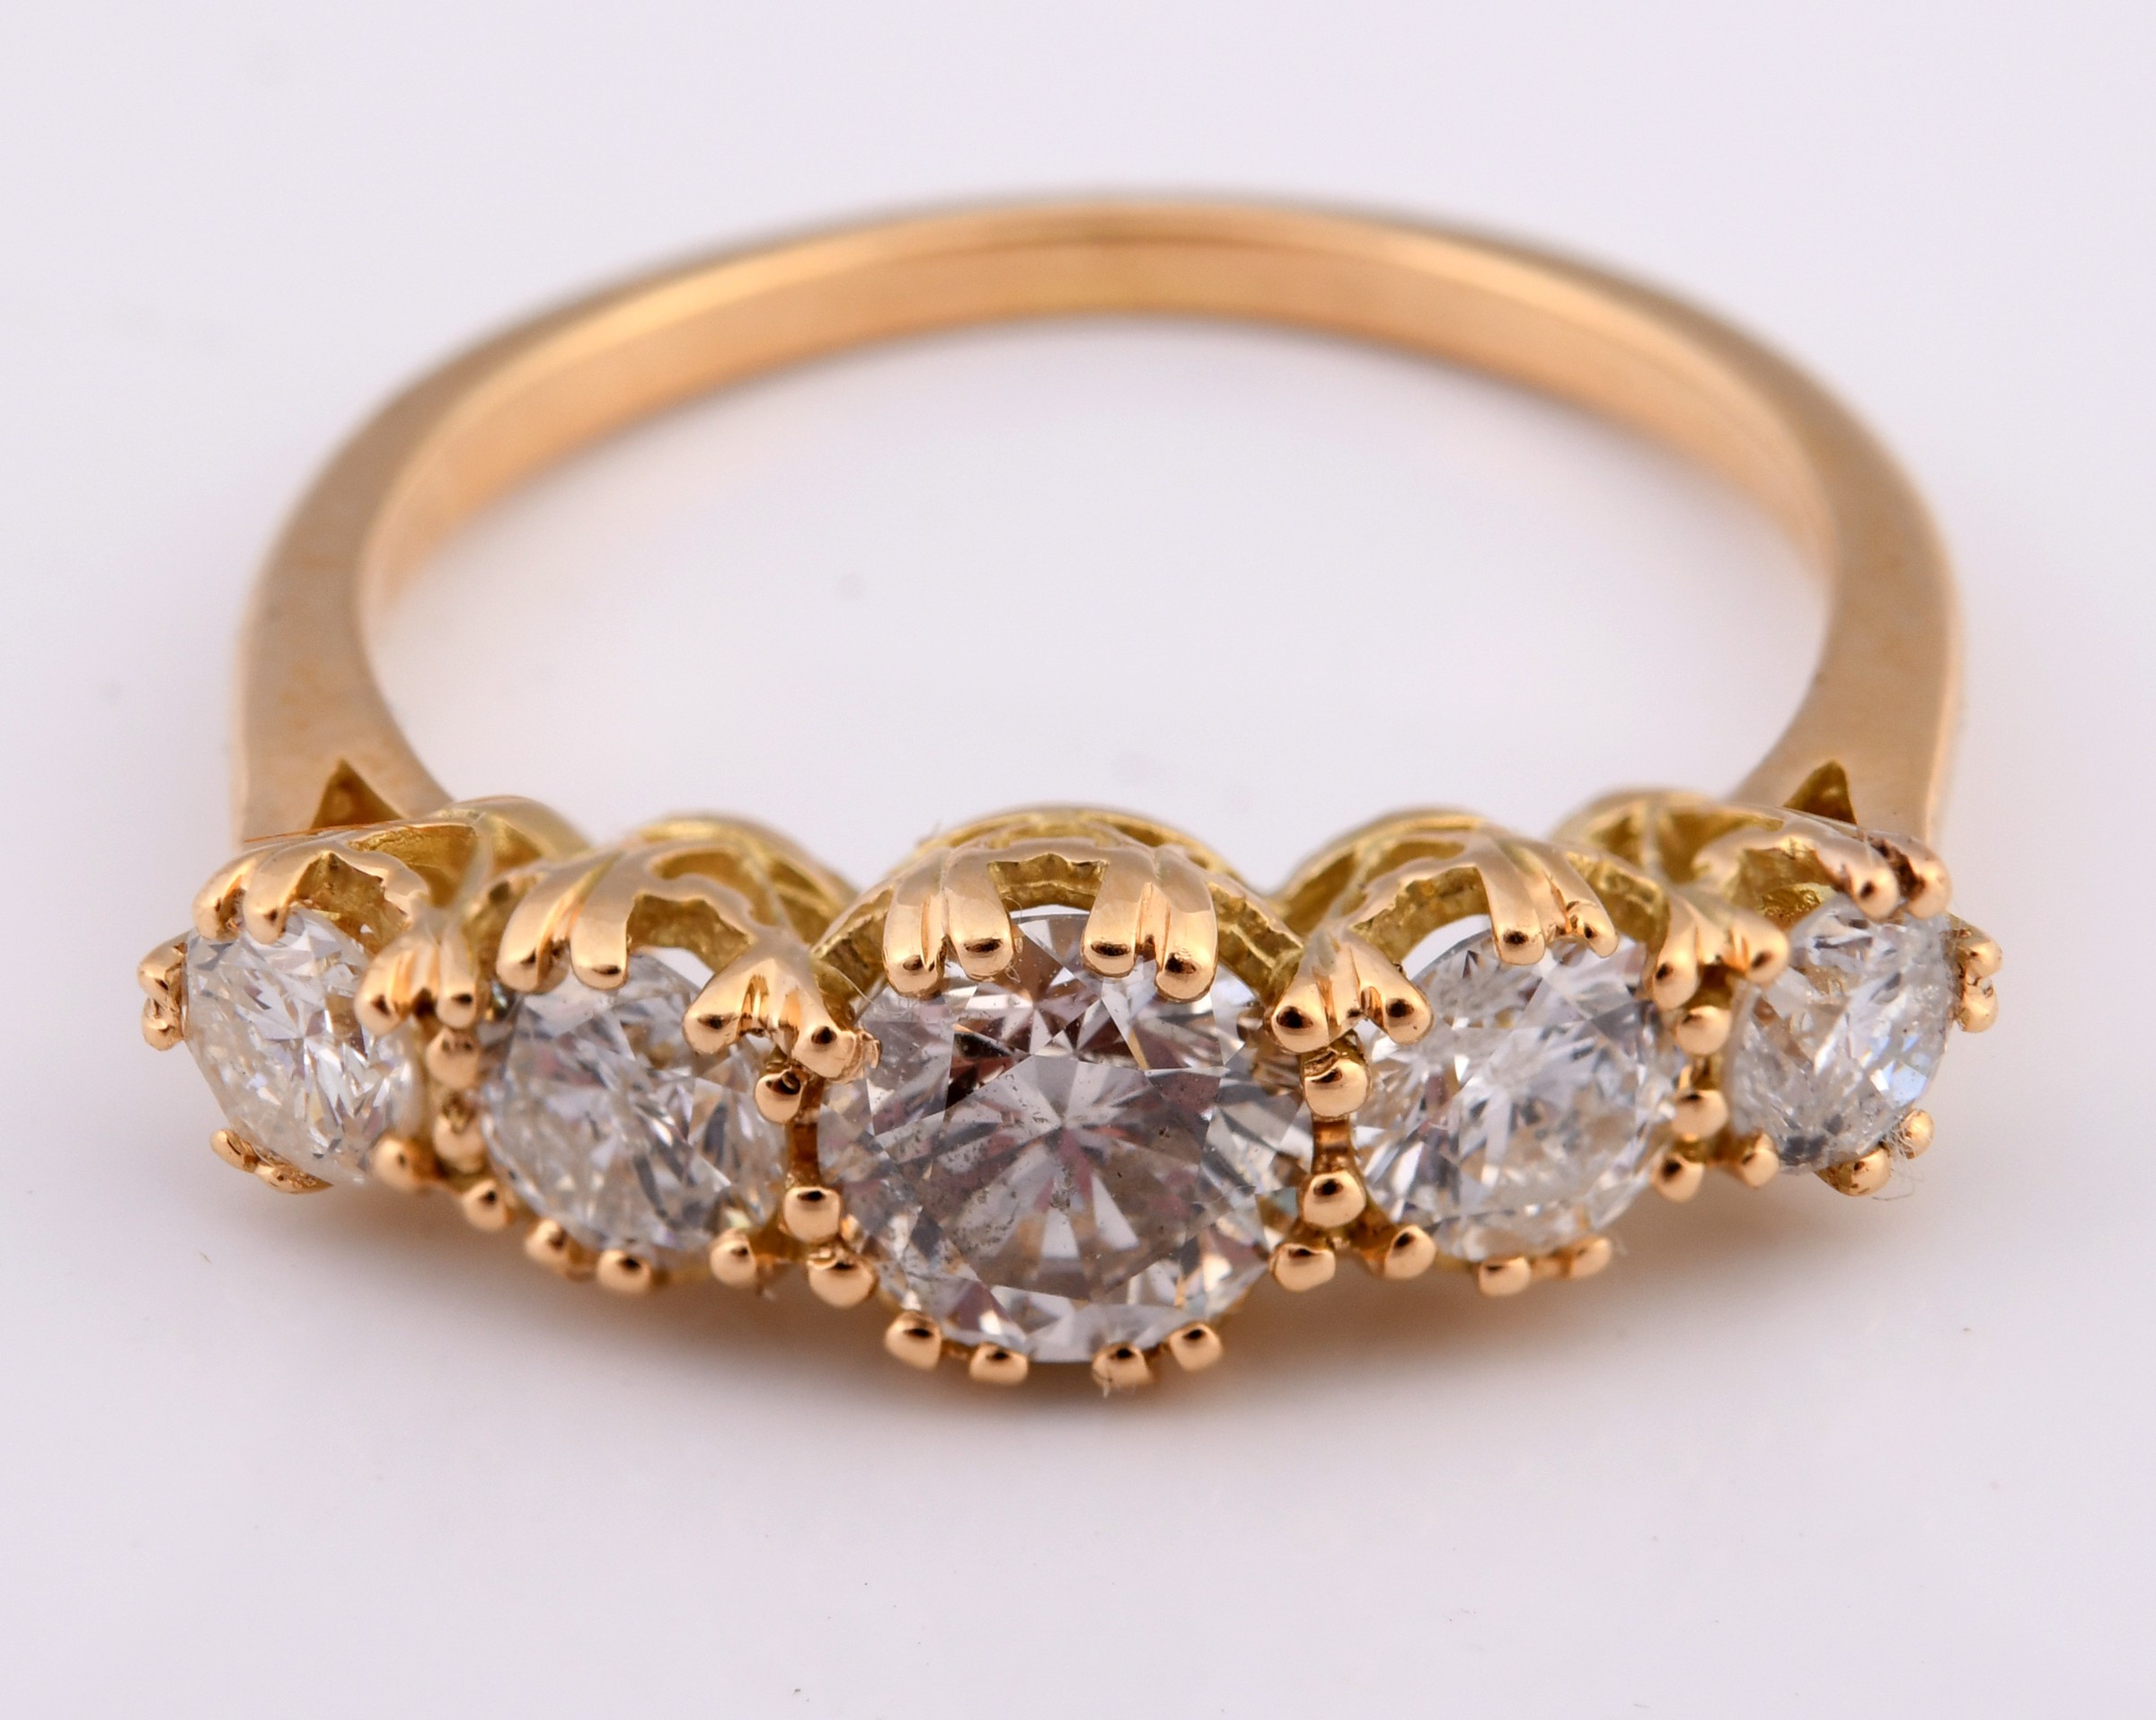 An 18ct gold and five stone diamond ring, ring size K Diamond weight 1.59ct approx. with the